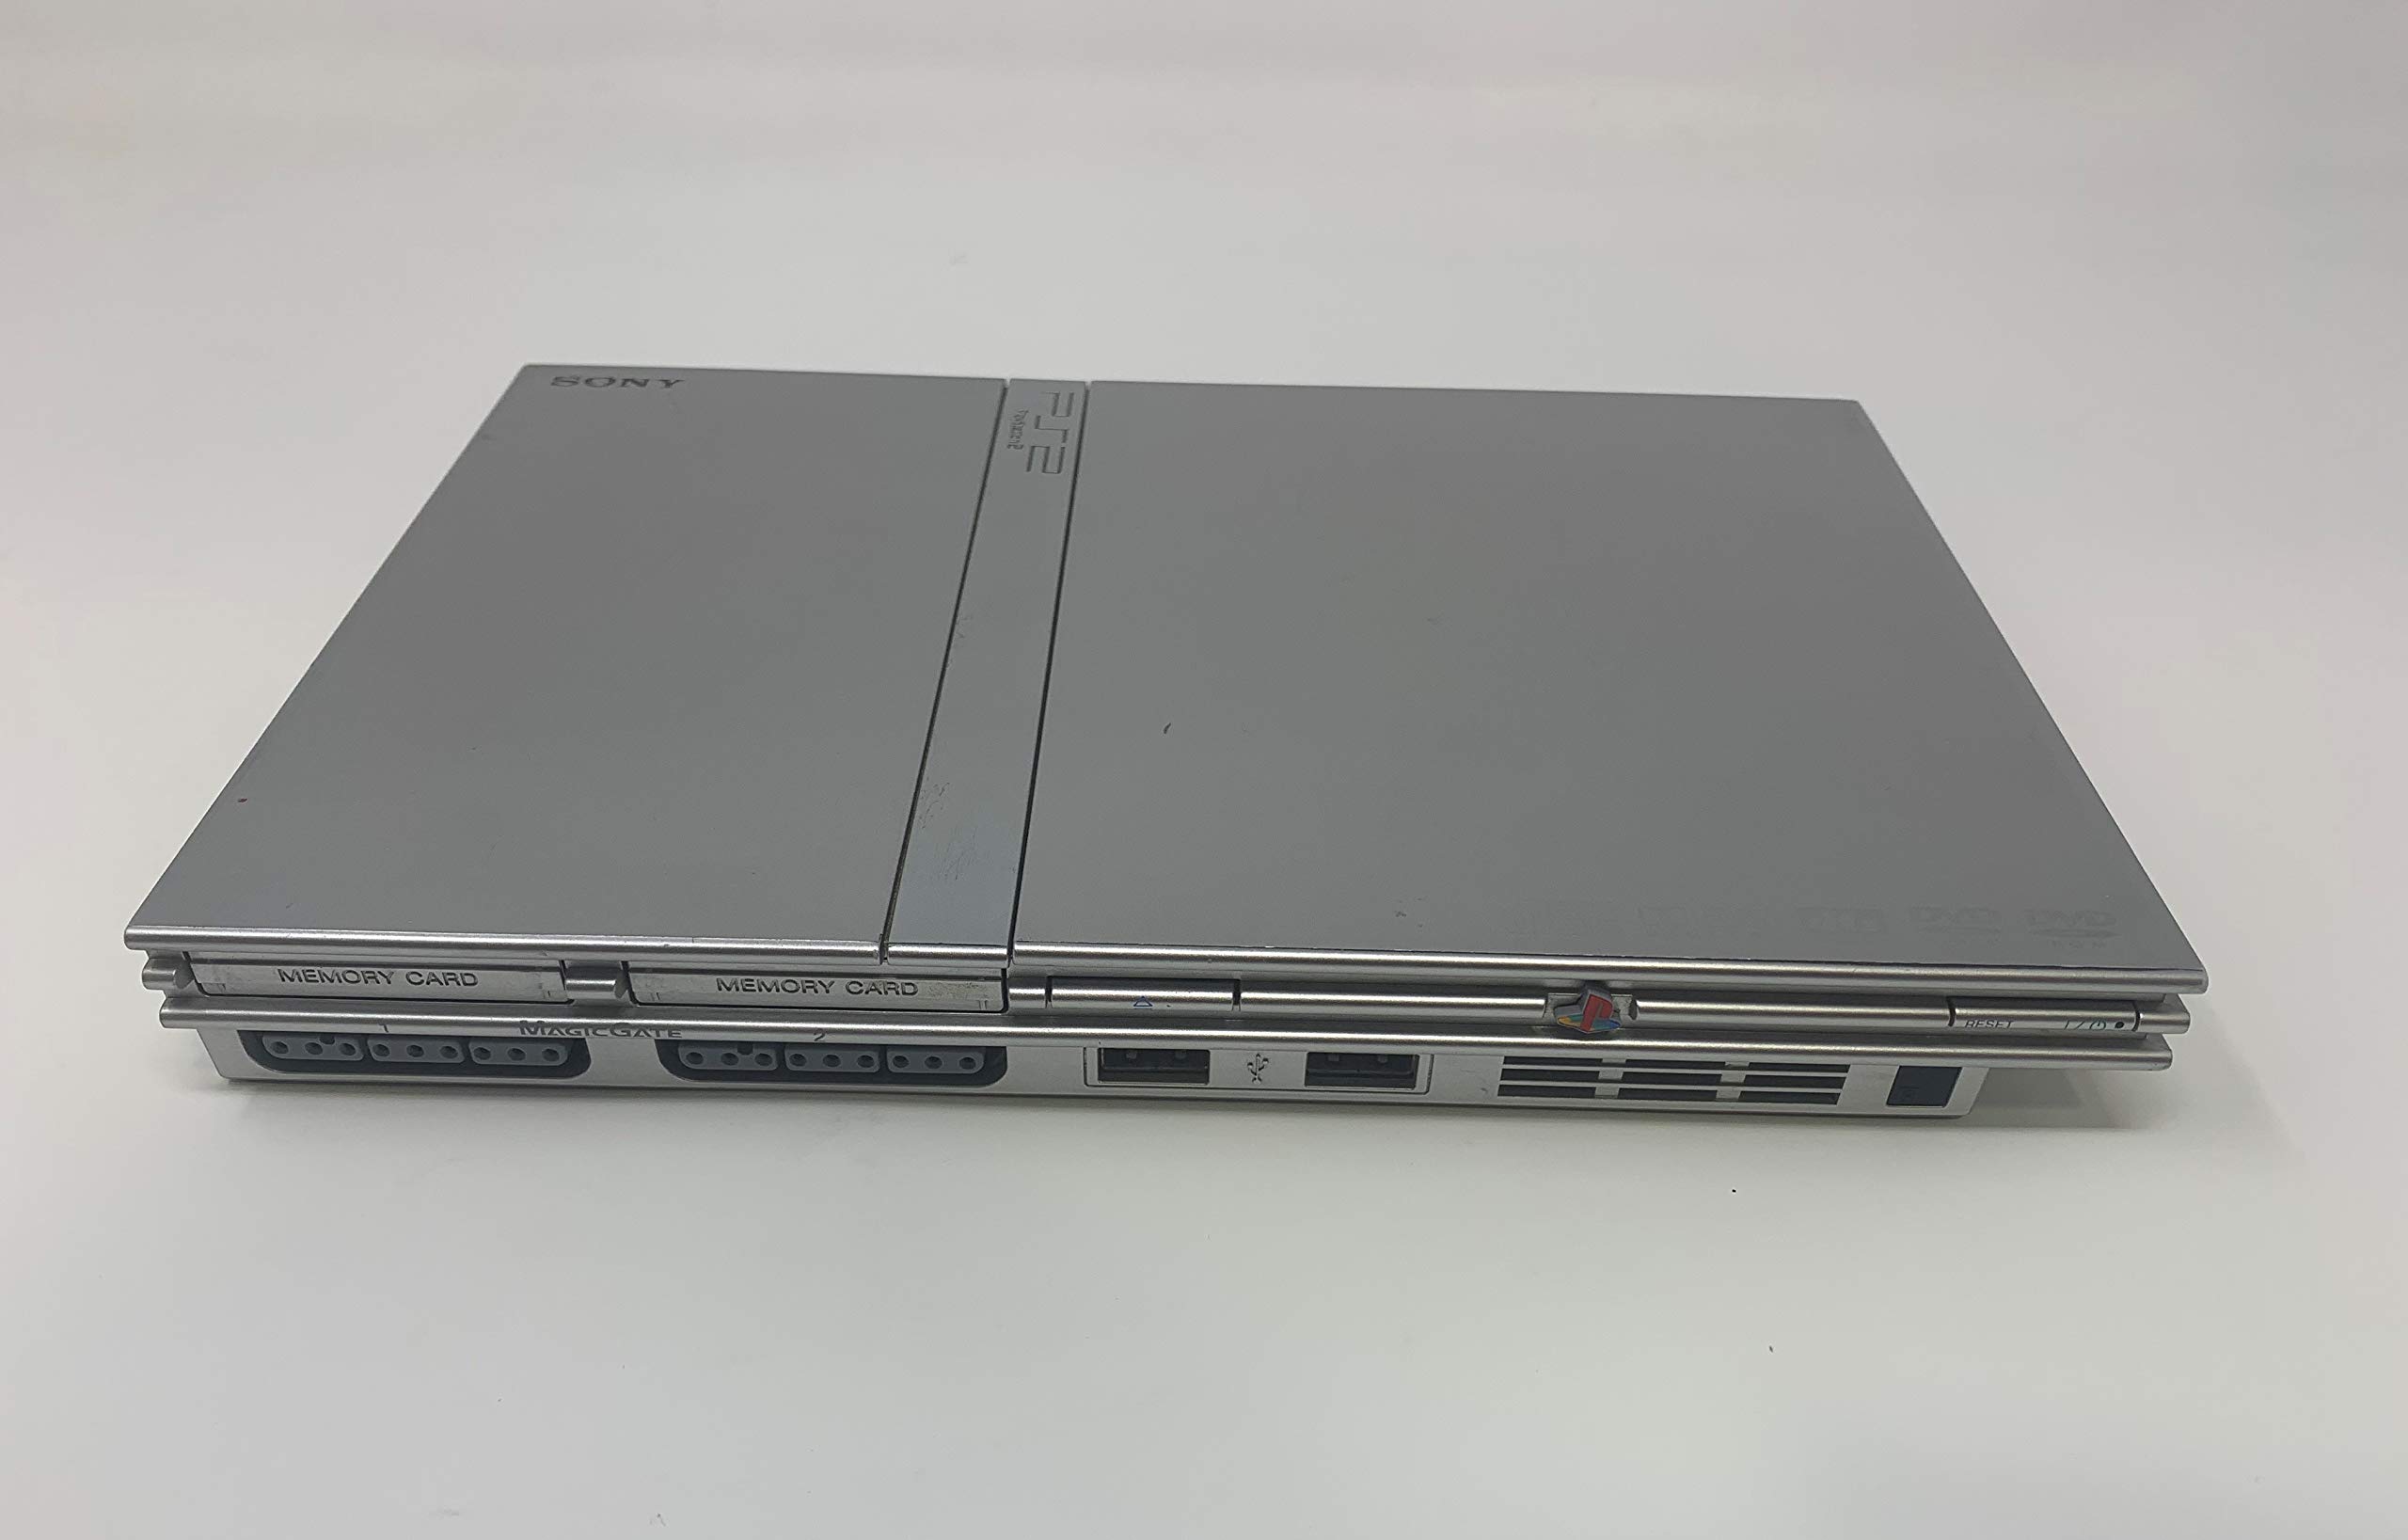 Playstation 2 Slim (Silver) Replacement Console Only - No Cables or Accessories (Renewed)